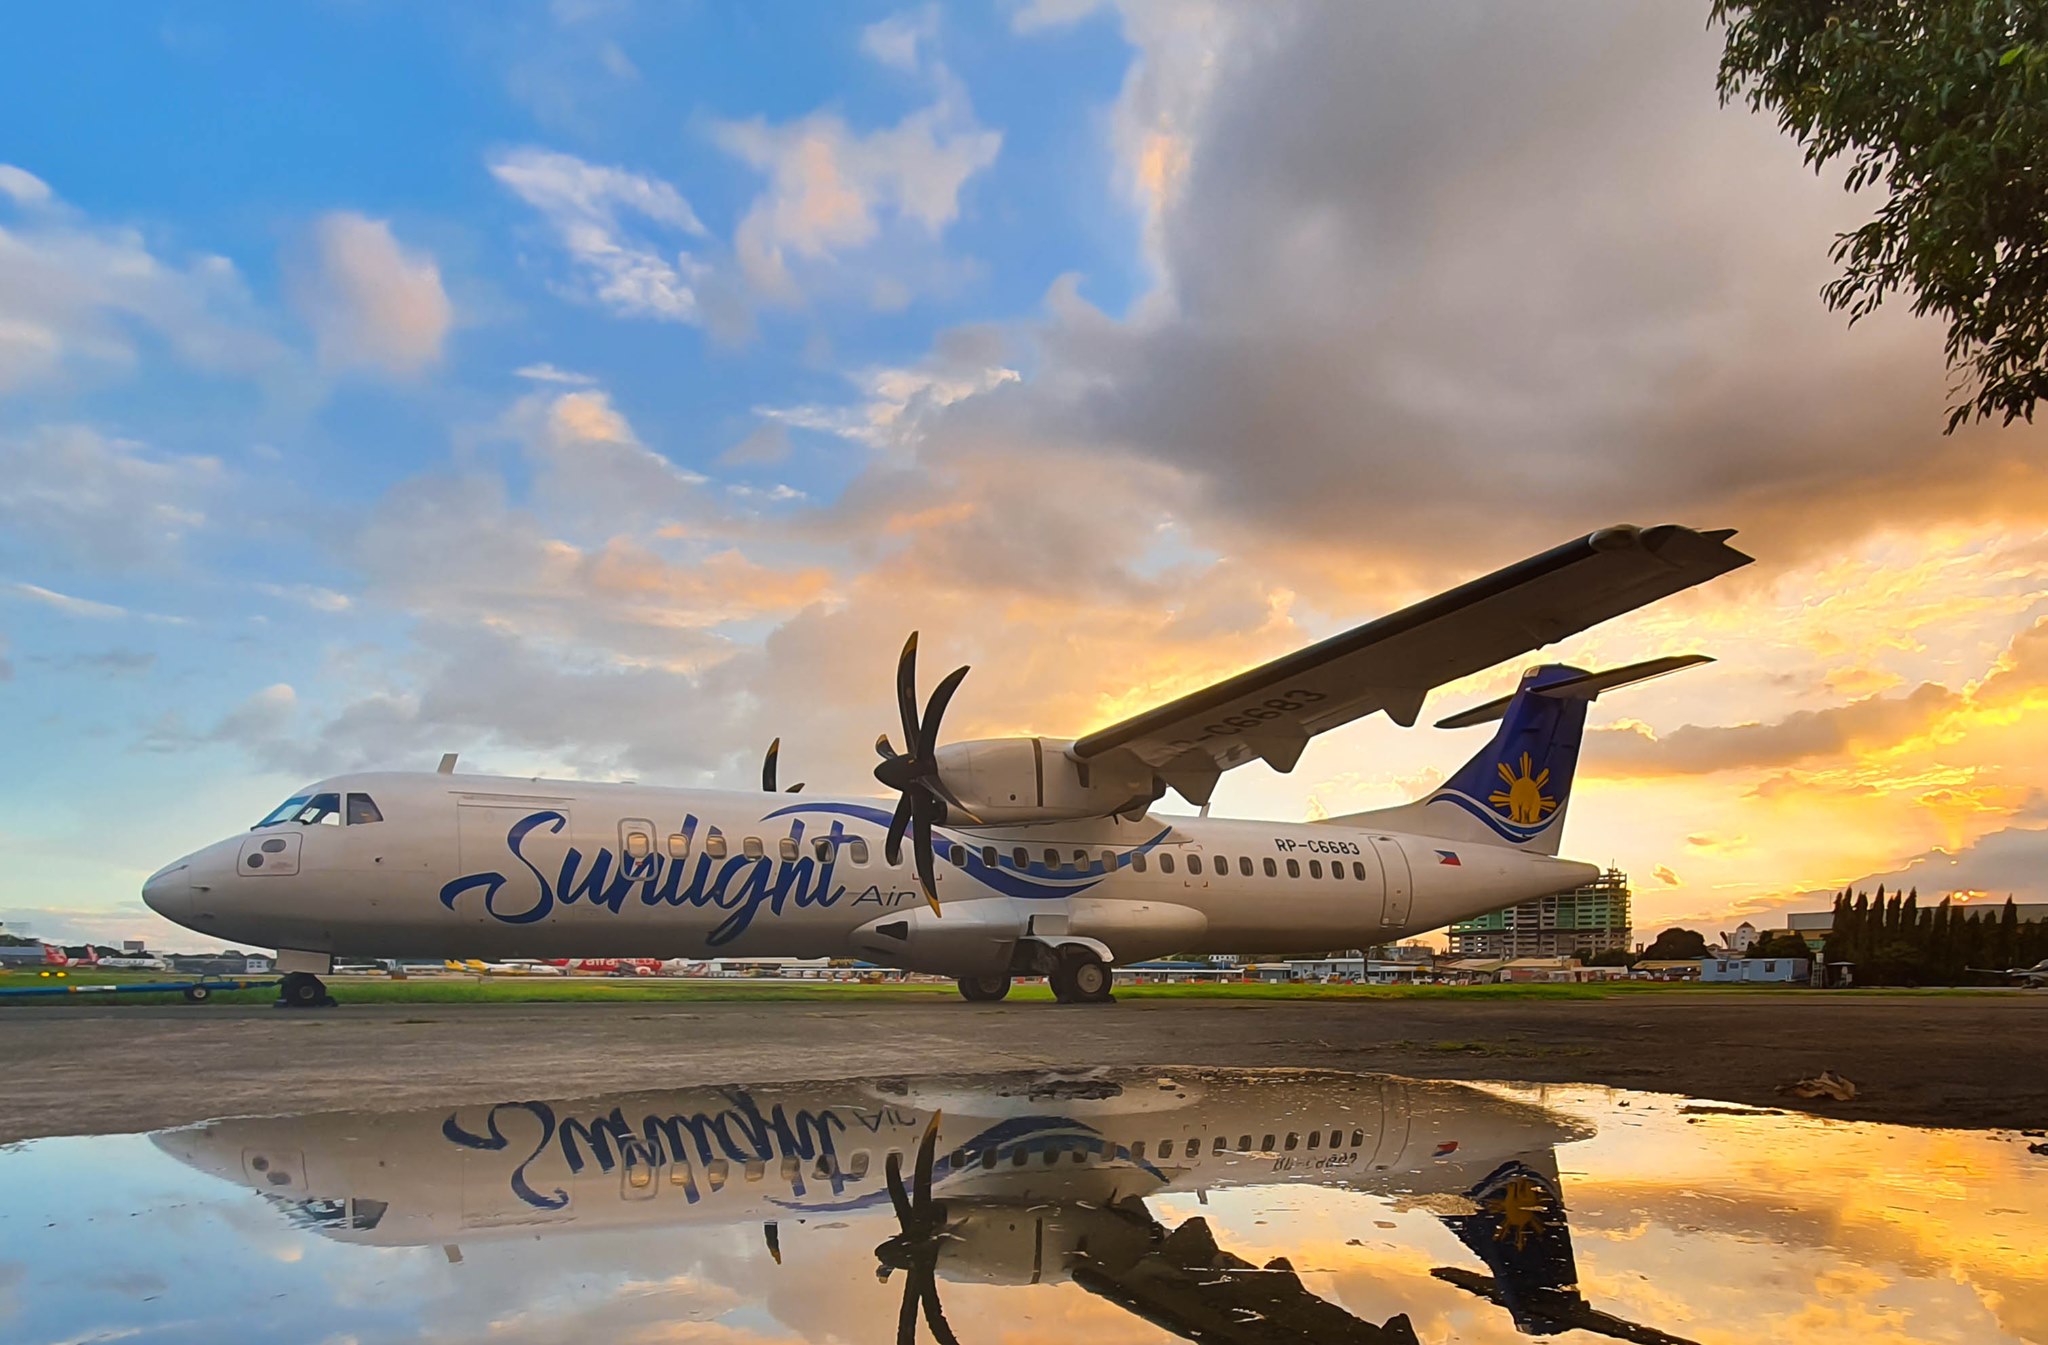 sunlight air 1 • Sunlight Air is the newest player in PH domestic air travel